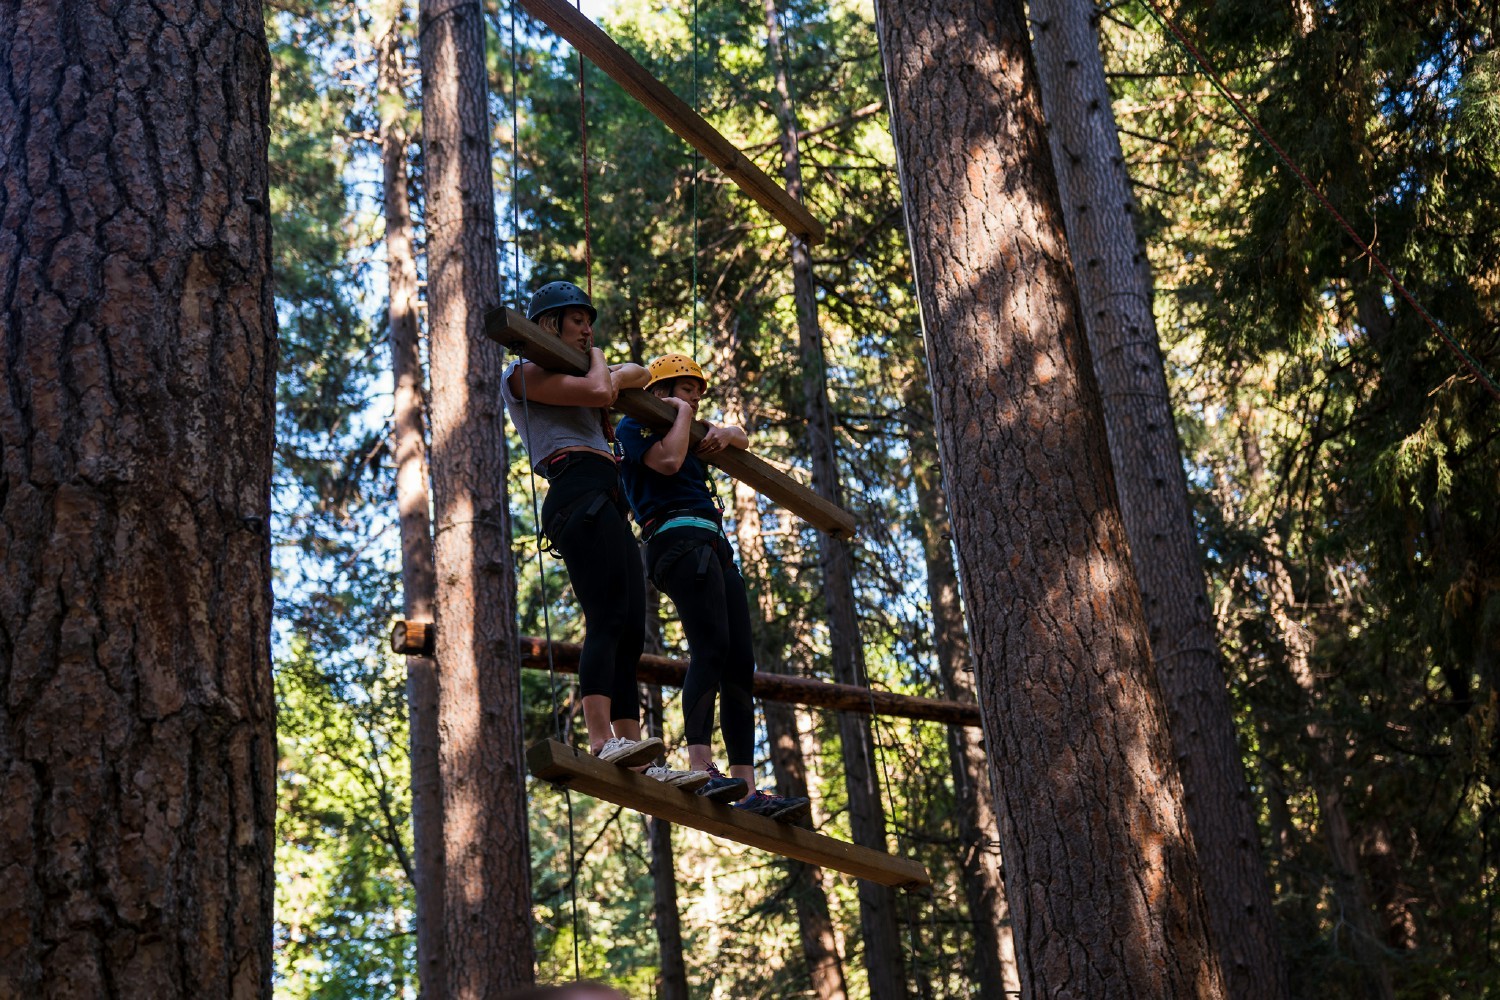 Vertical obstacle course at the company retreat 2019